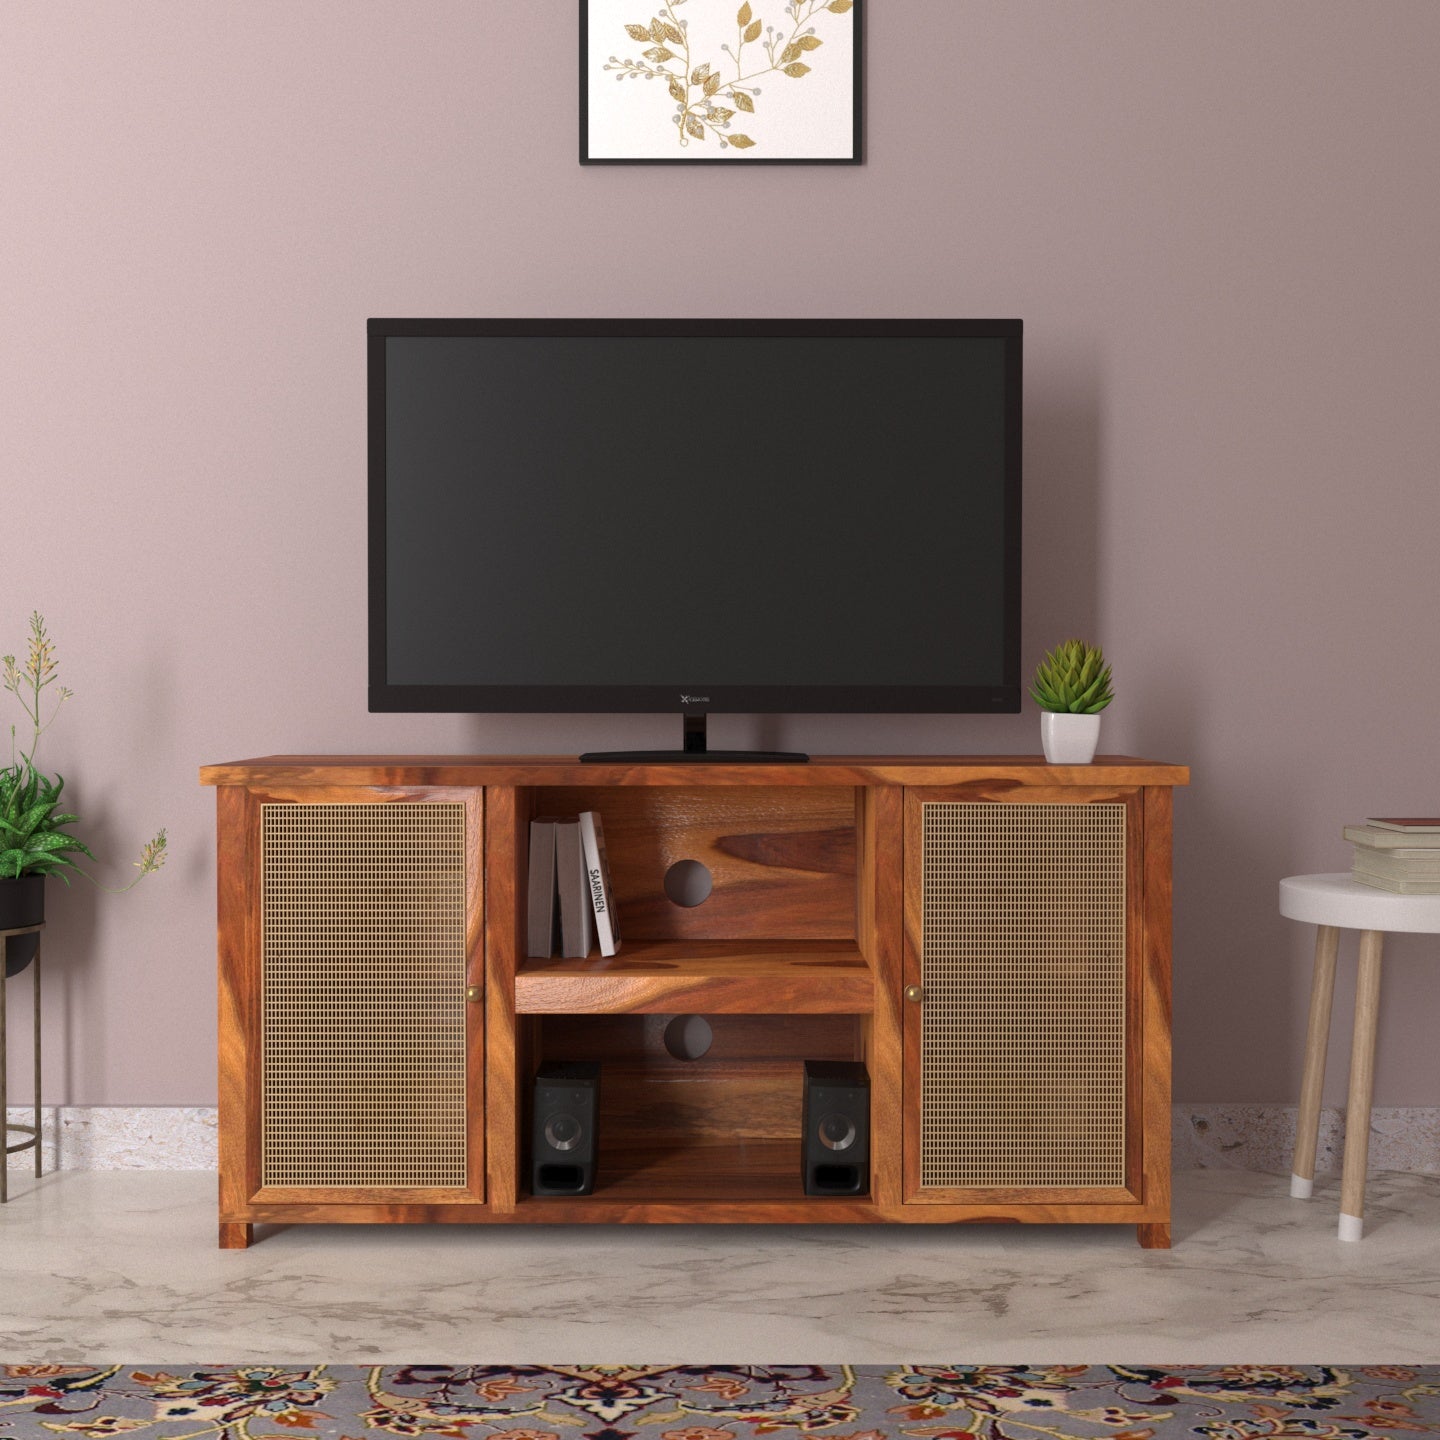 Melbourne Antique Finish Style Handmade Wooden TV Stand for Home Tv stand